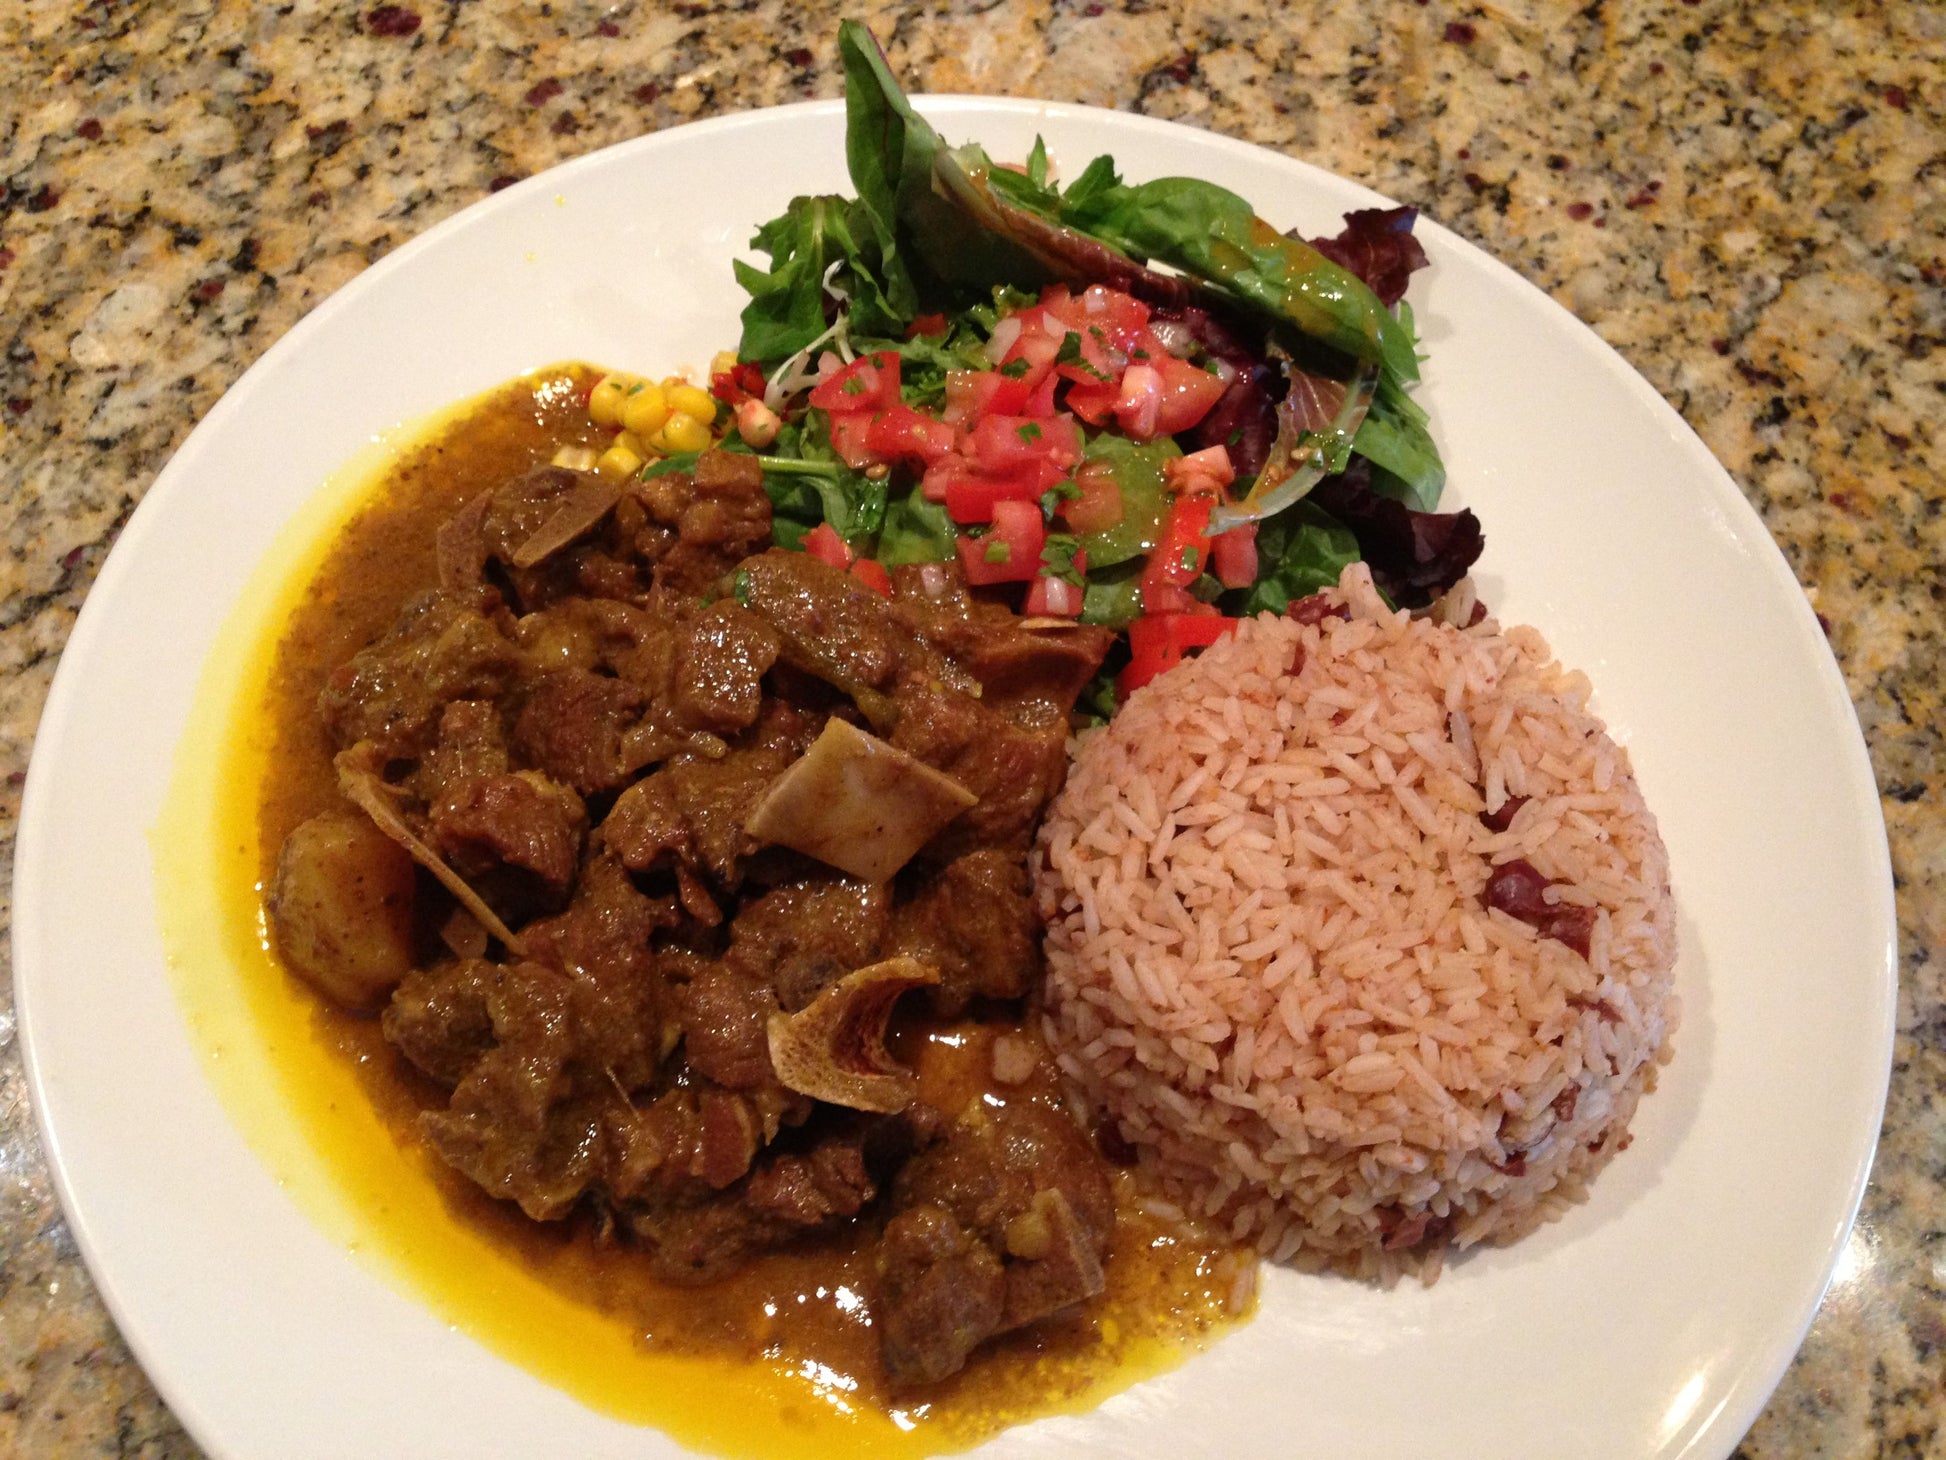 Curry goat with rice and peas